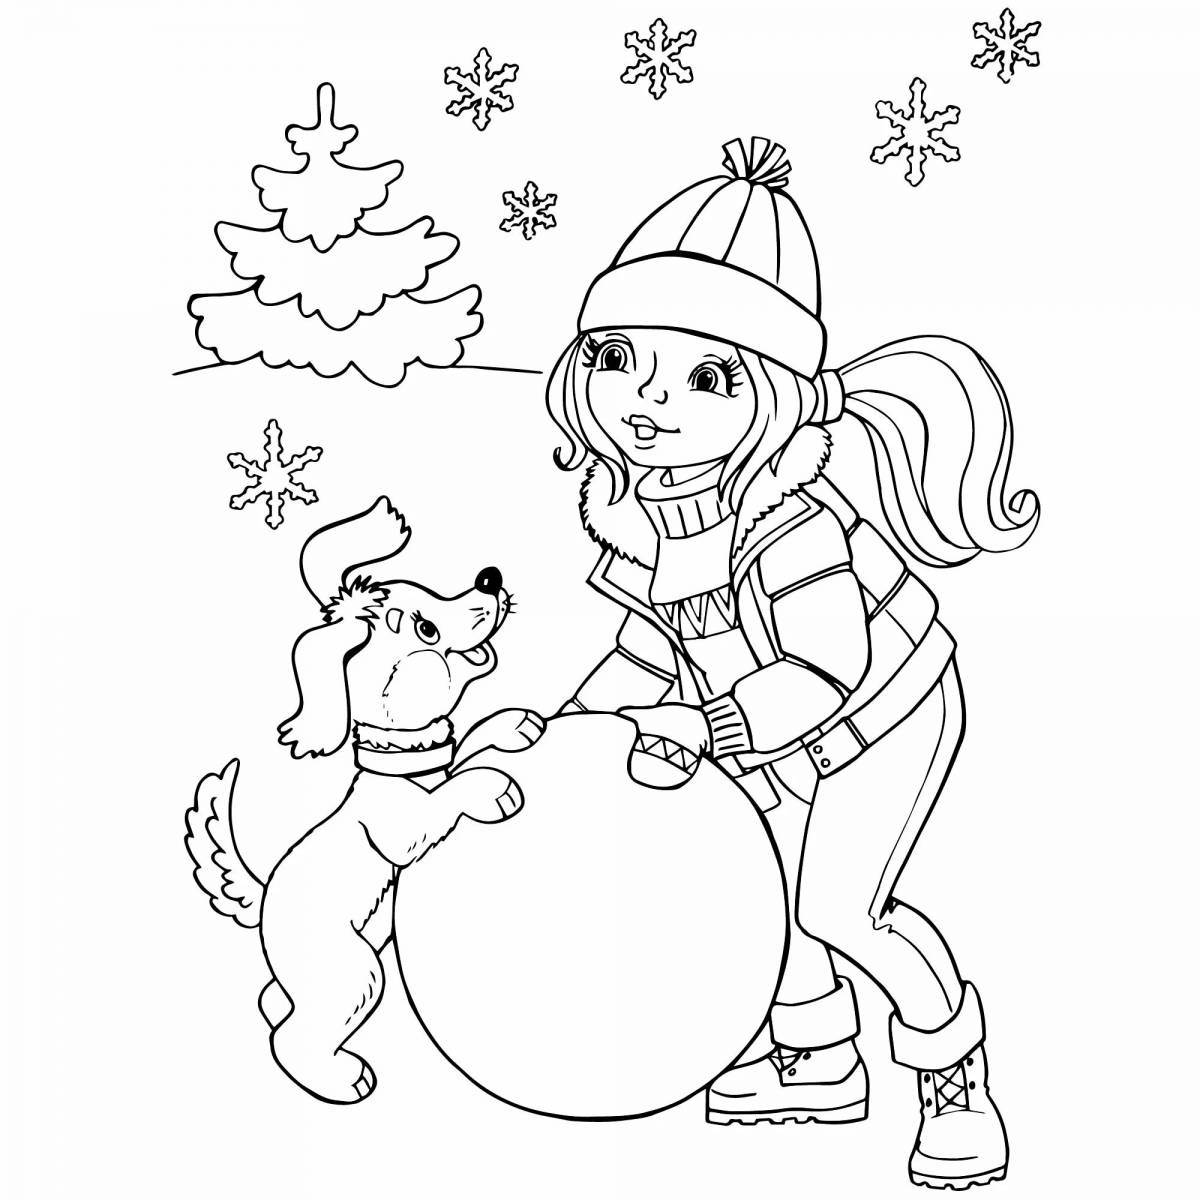 Live winter coloring book for 6 year olds